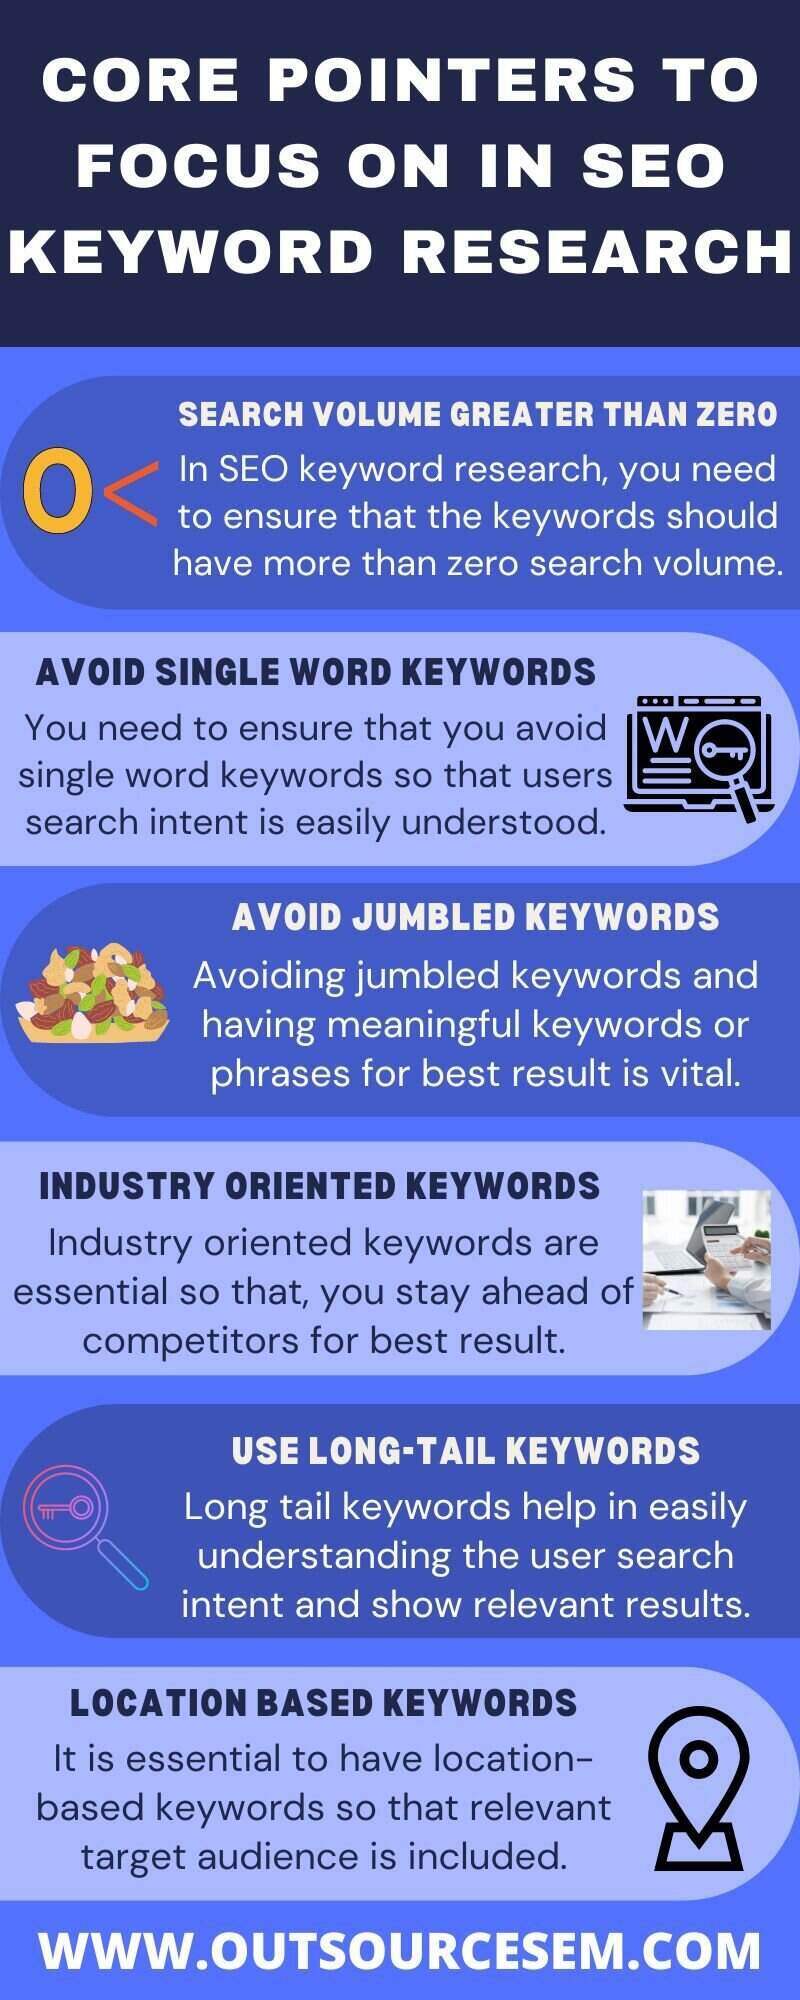 seo-keyword-research-infographic